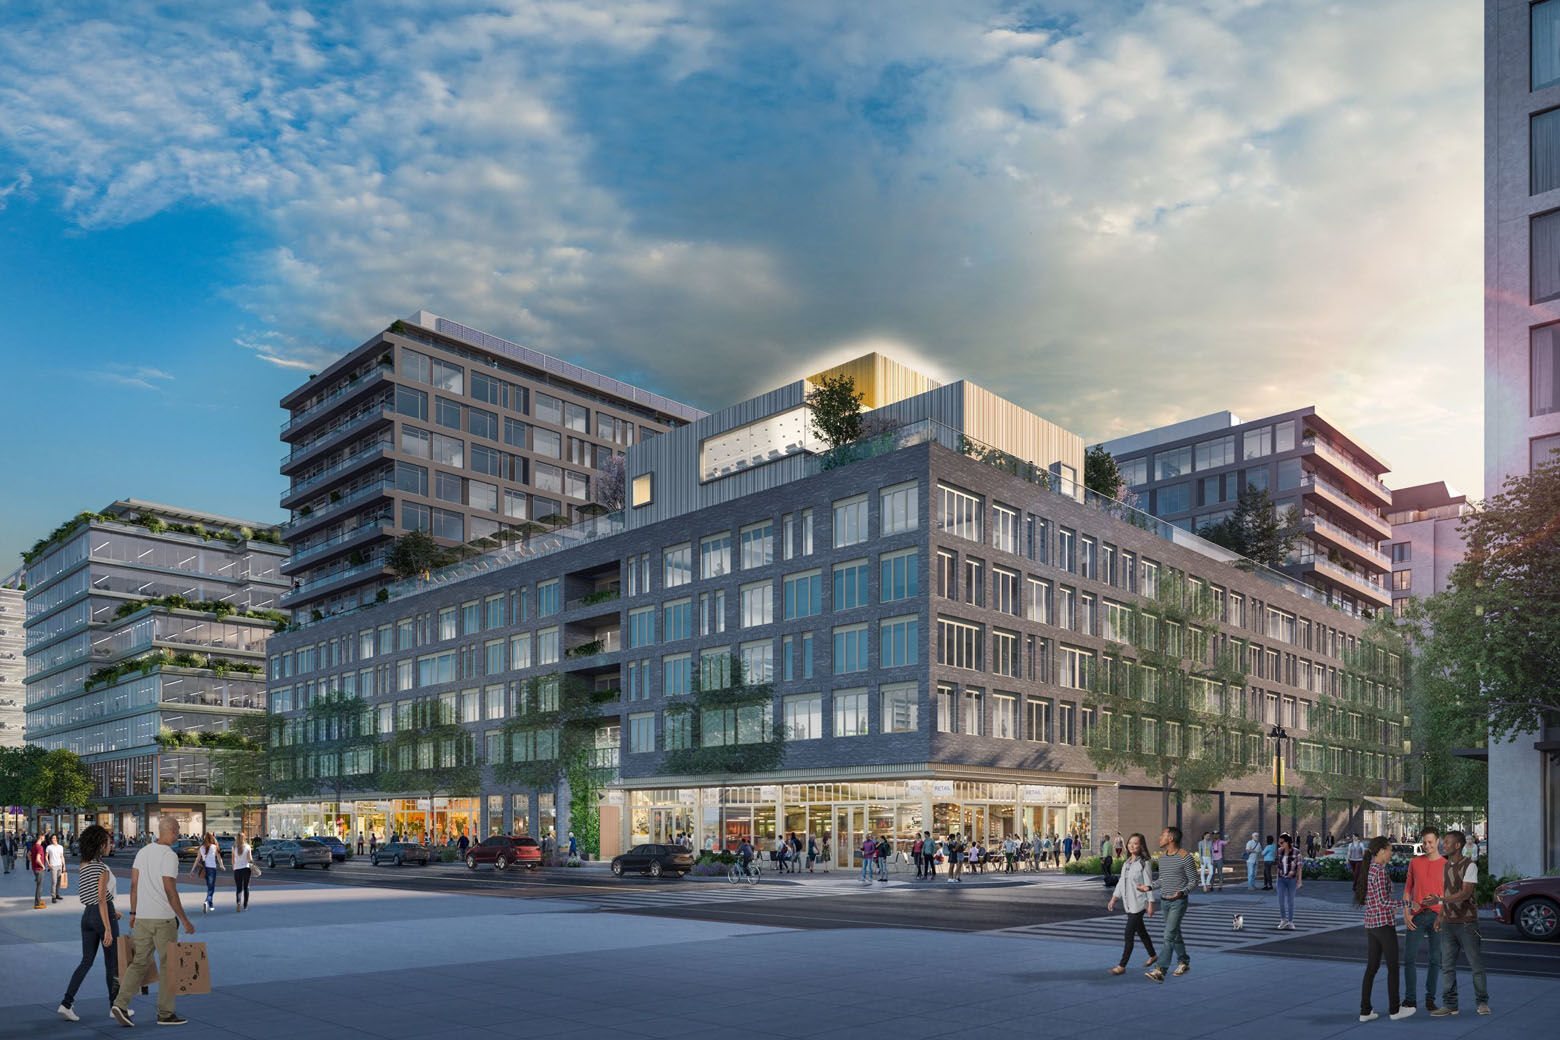 Co-living apartment community Urby will occupy a Brookfield Properties Building with 467 apartments ranging from studios to three-bedroom units in Southeast D.C.  (Courtesy Tangrams3D)